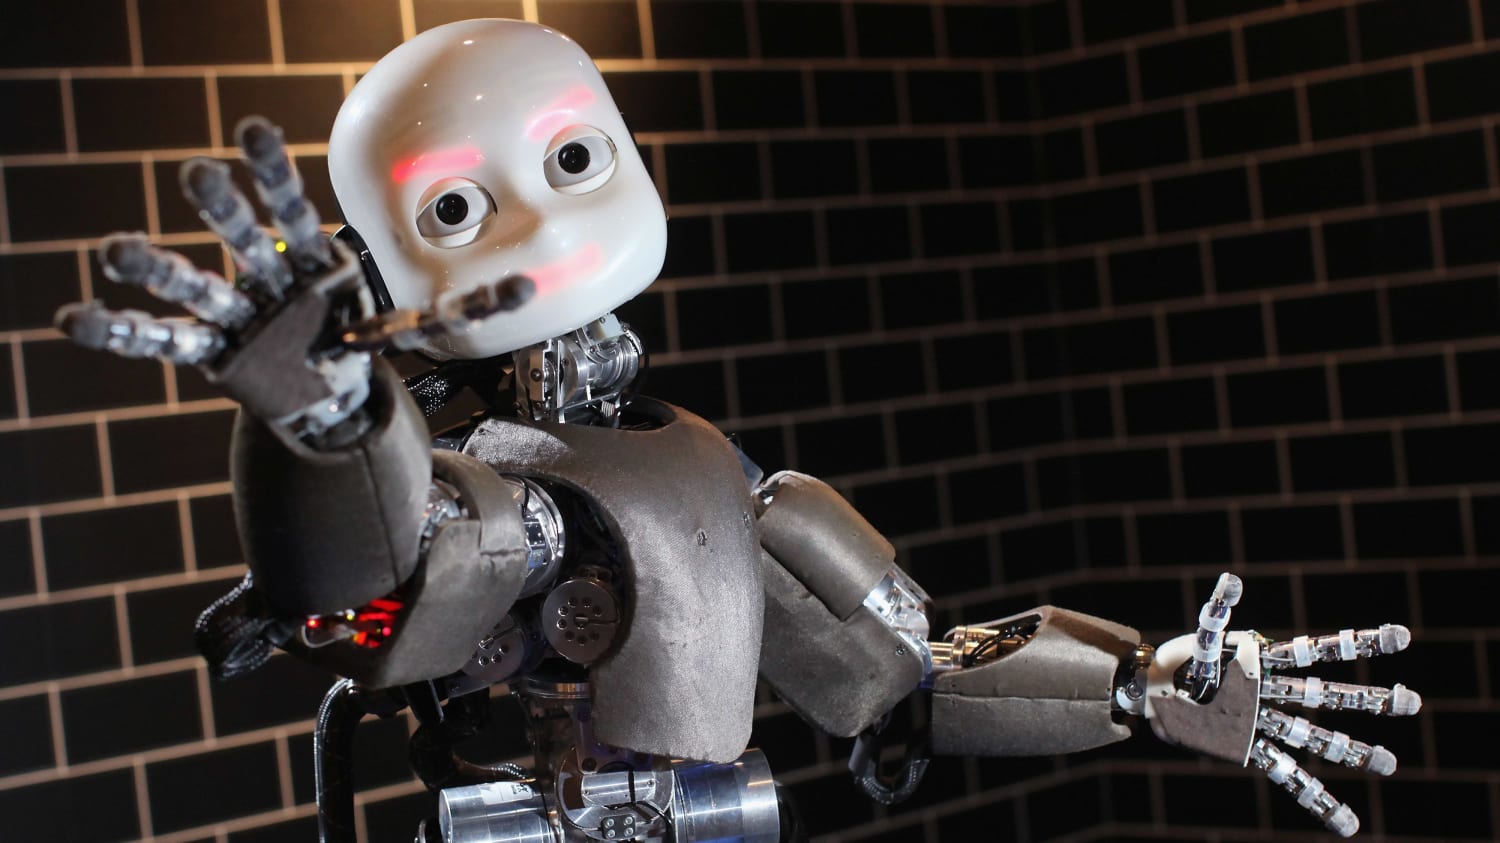 Italian Scientists Created a Robot Toddler and It's Kind of Terrifying